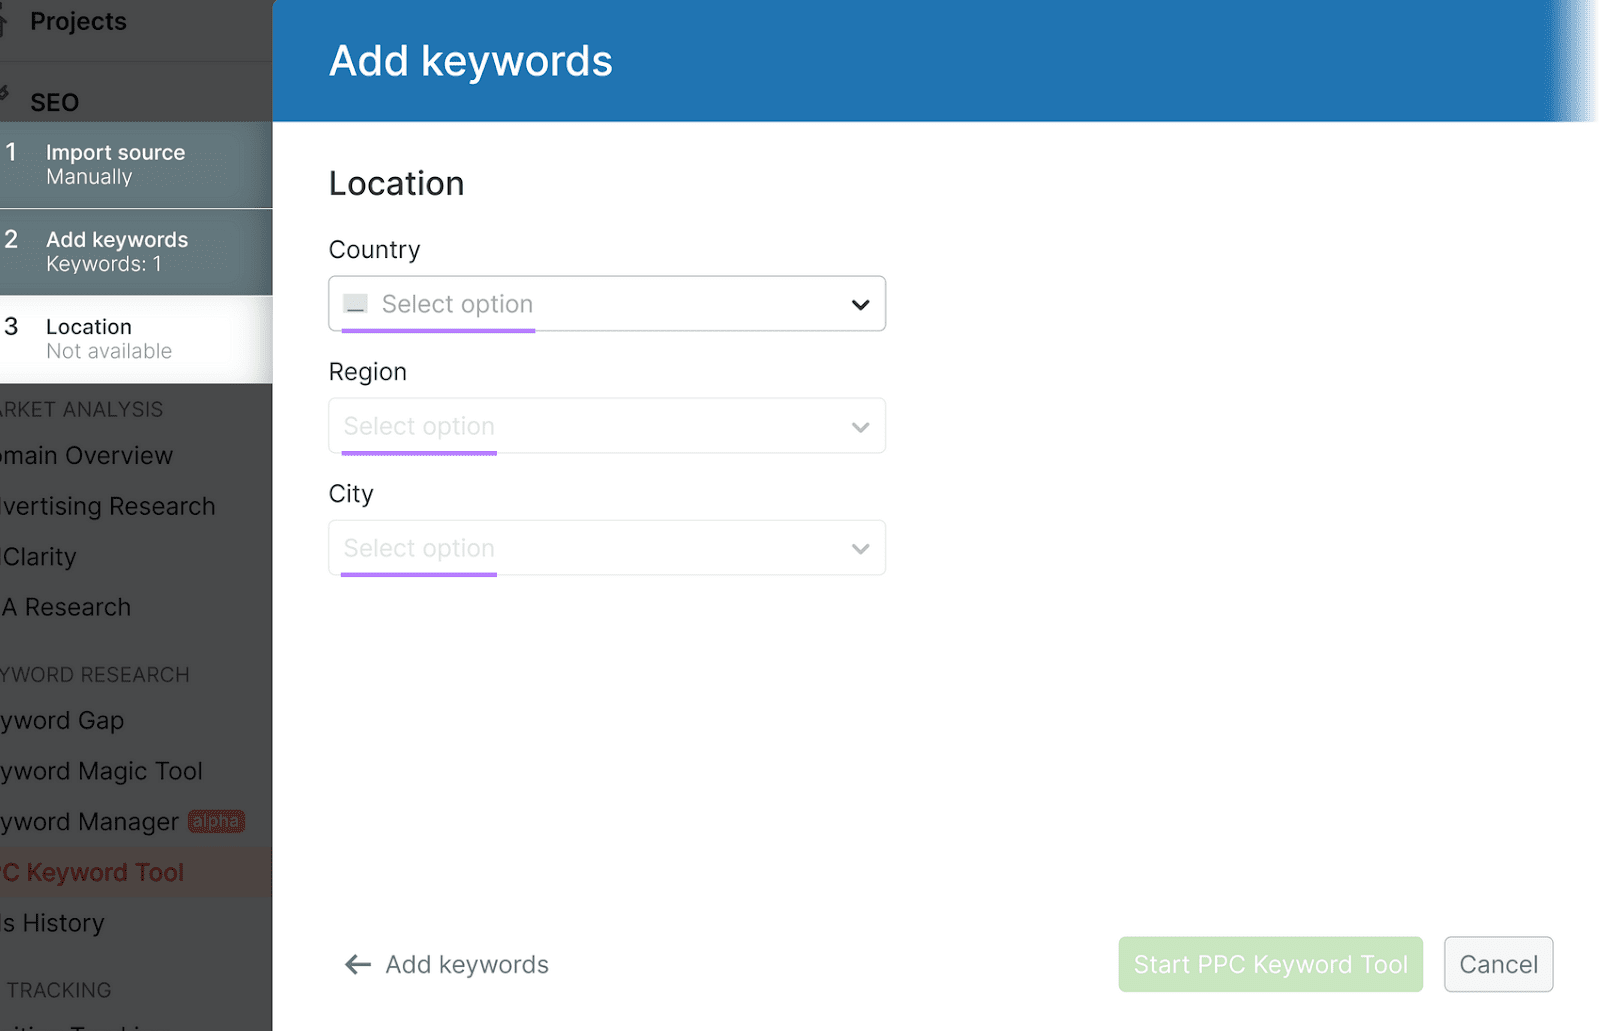 PPC Keyword Tool interface for adding keywords with fields for targeting country, region, and city.